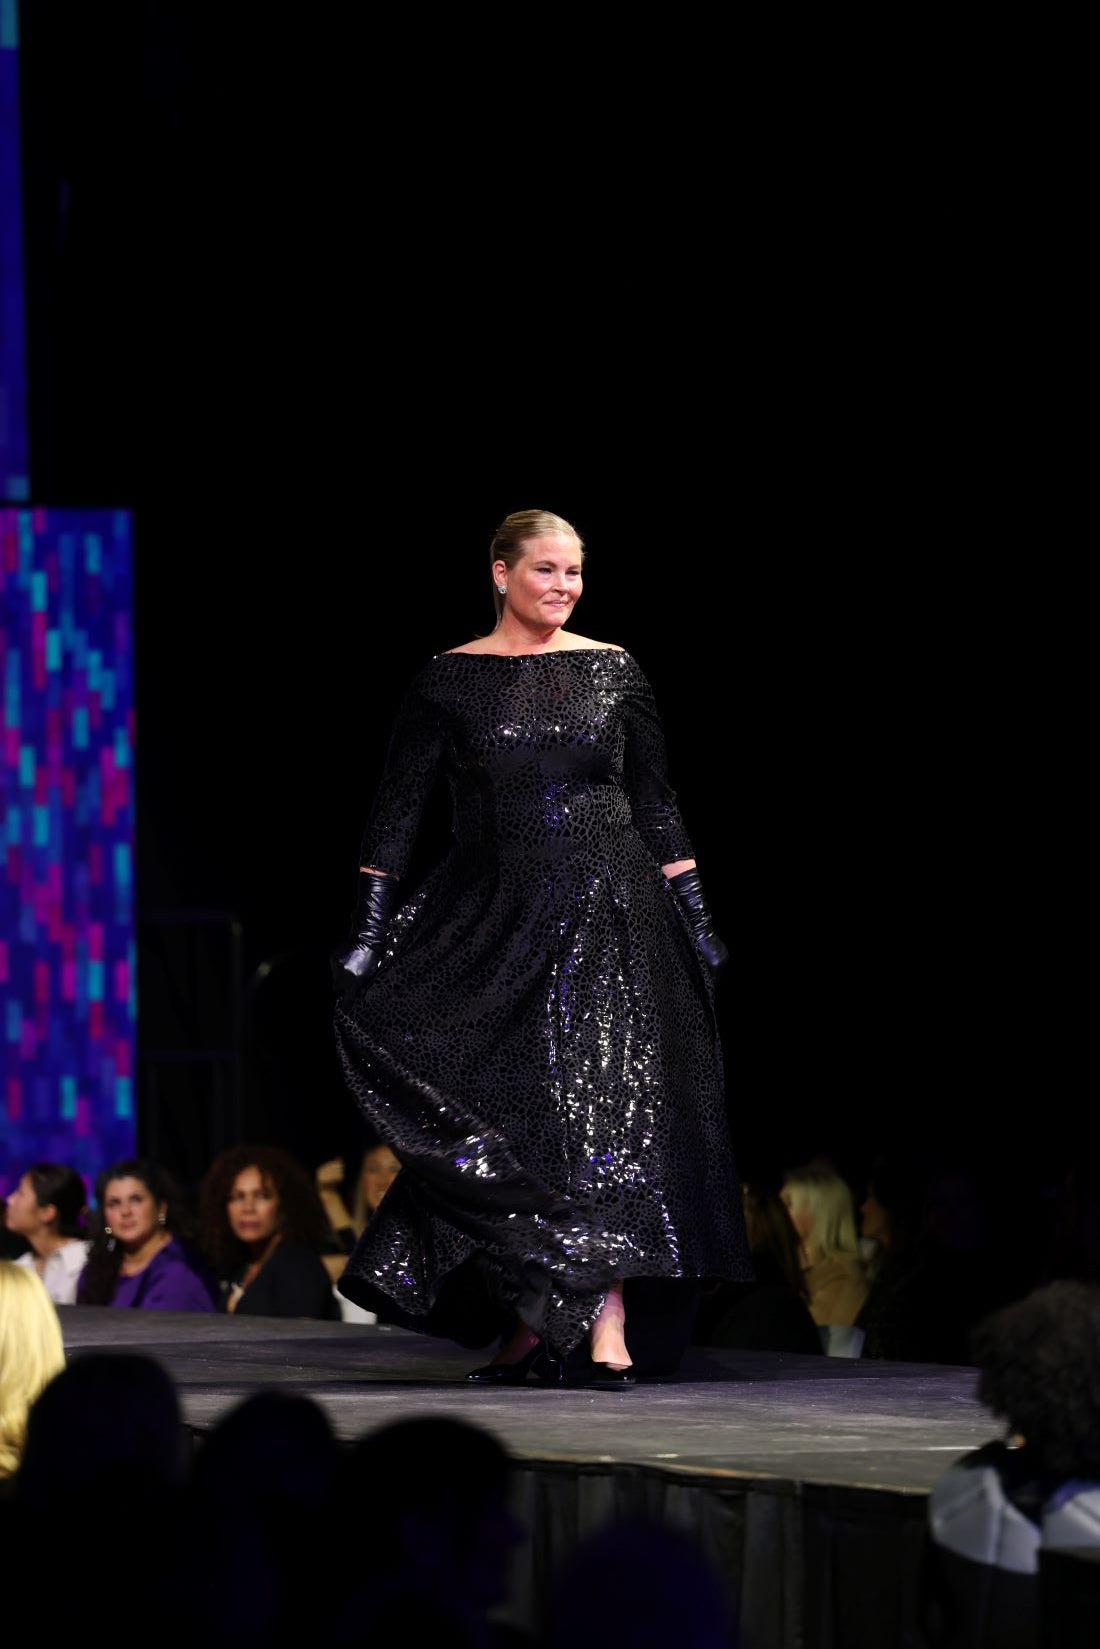 HOK House Of KLynn Couture Rich Black Sequins Luxury Gown Evening Event Gala Vogue Runway Top Looks Lifestyle Holiday Party New Years Eve Birthday Red Carpet Style Inspiration Cover Model Designer Box Office Ball Plus Size Pose Flowing